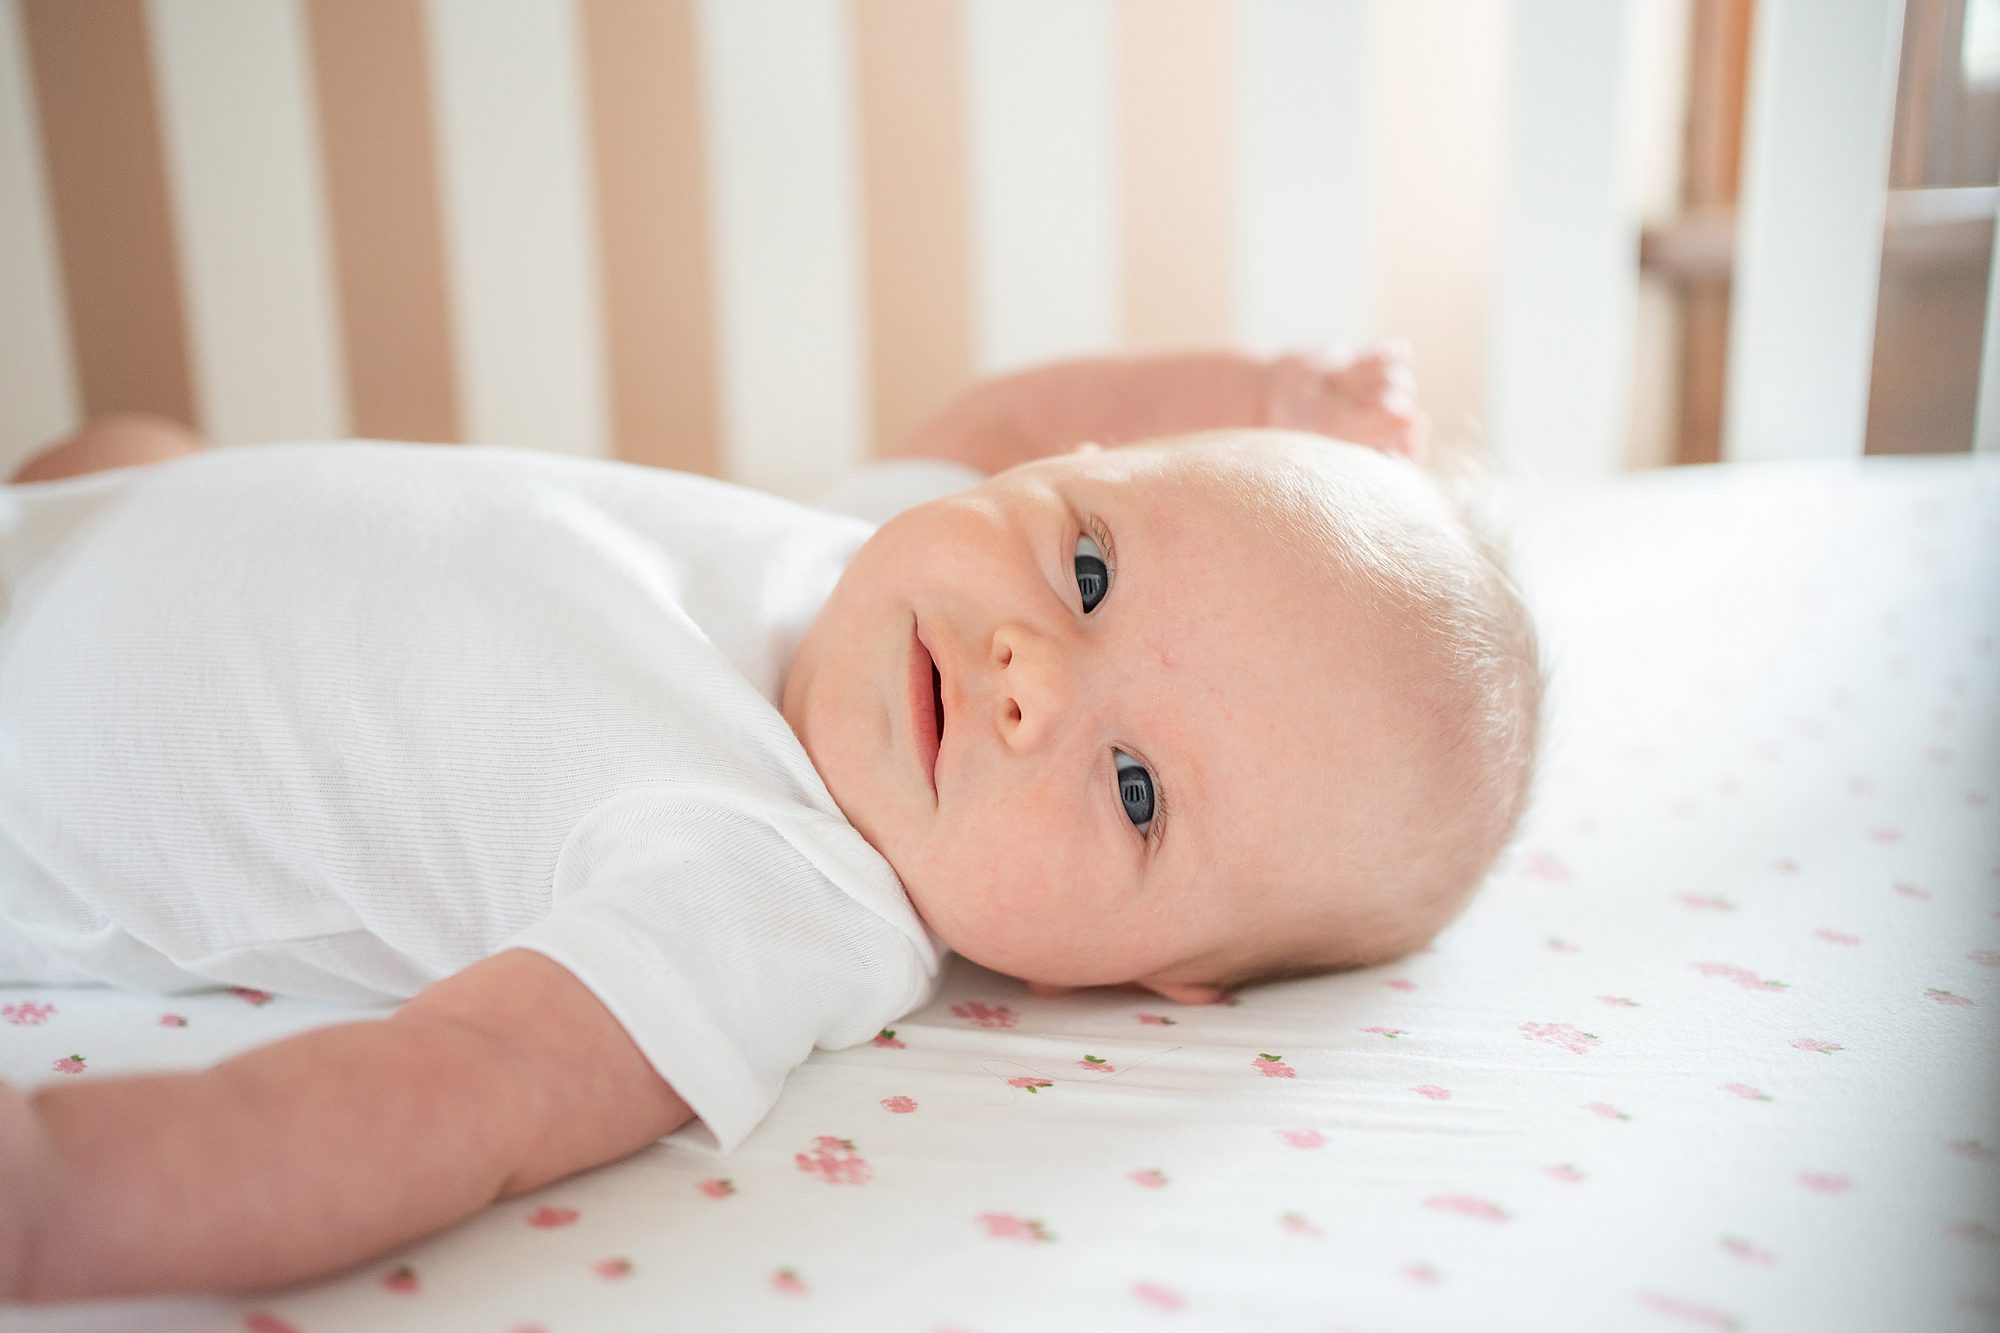 Baby lying on a patterned sheet in a crib.